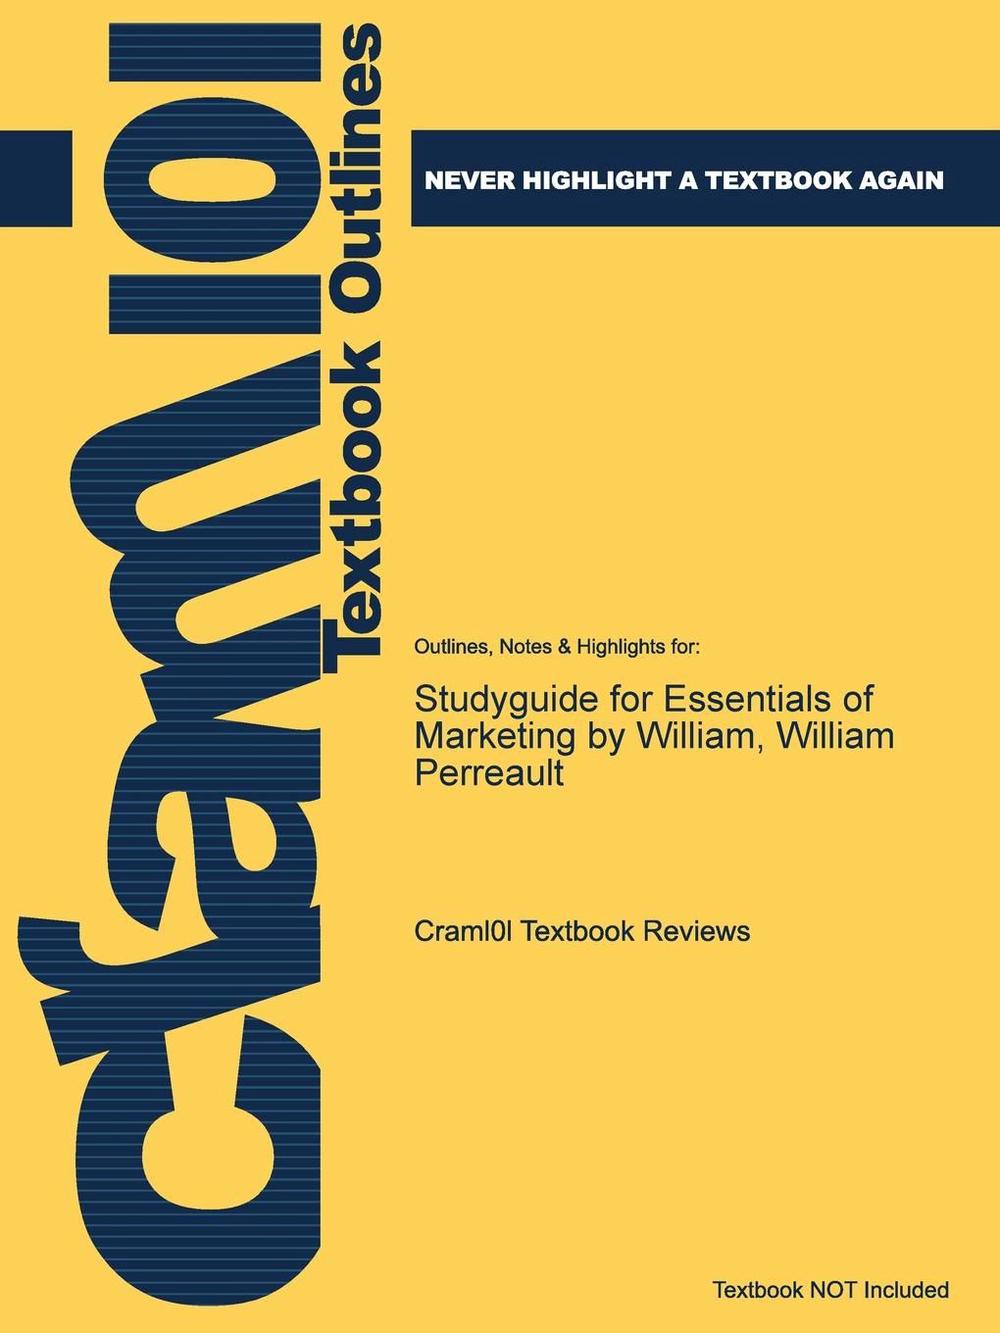 Studyguide for Essentials of Marketing by William, William Perreault by